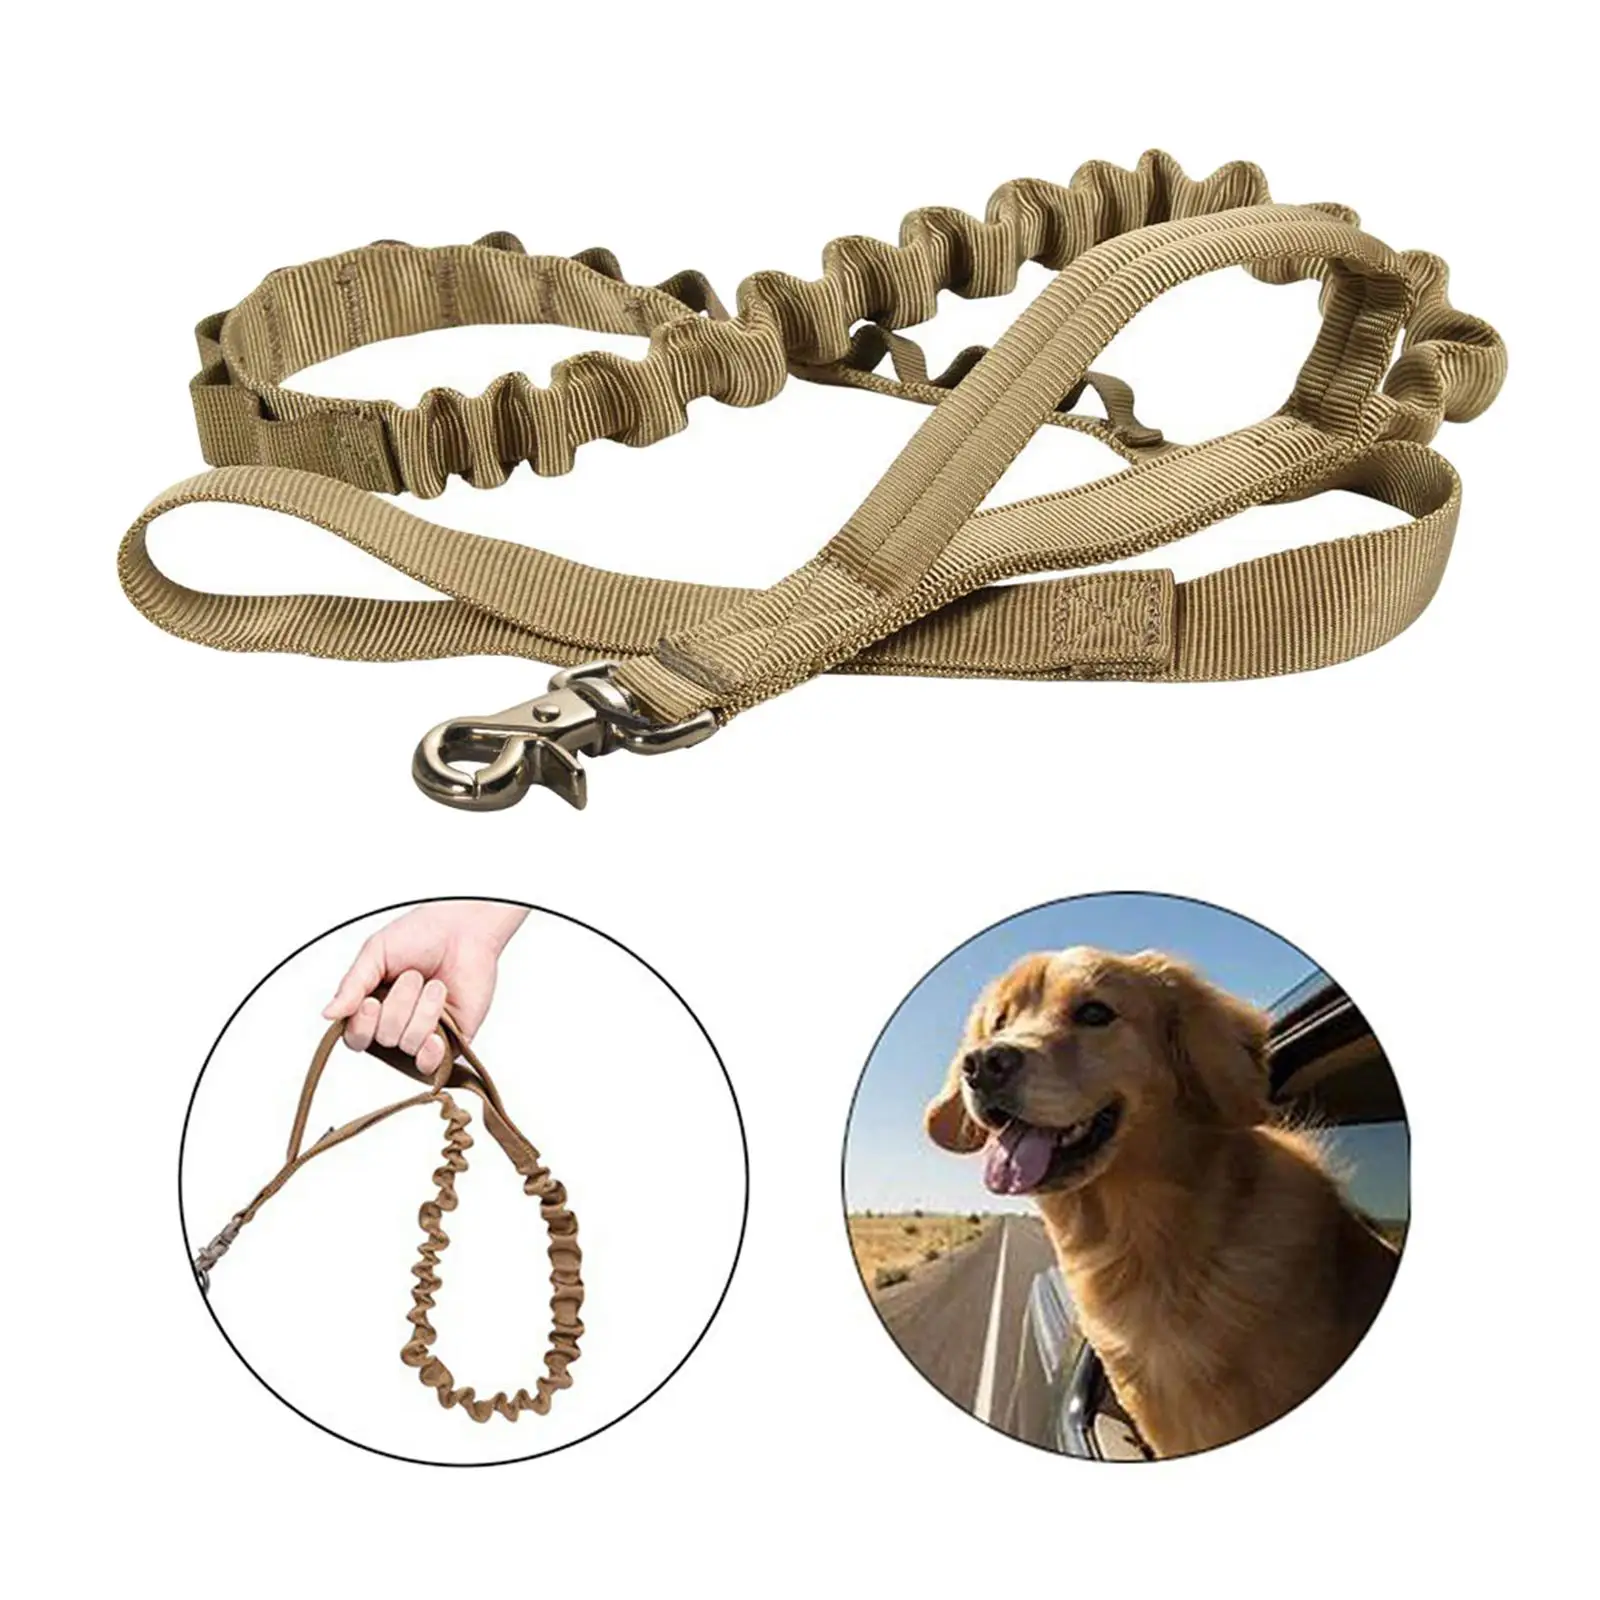 Nylon Elastic Bungee Training Pet Leash Control Dog Leash with Handle for Walking Kennel Puppy Jogging Running